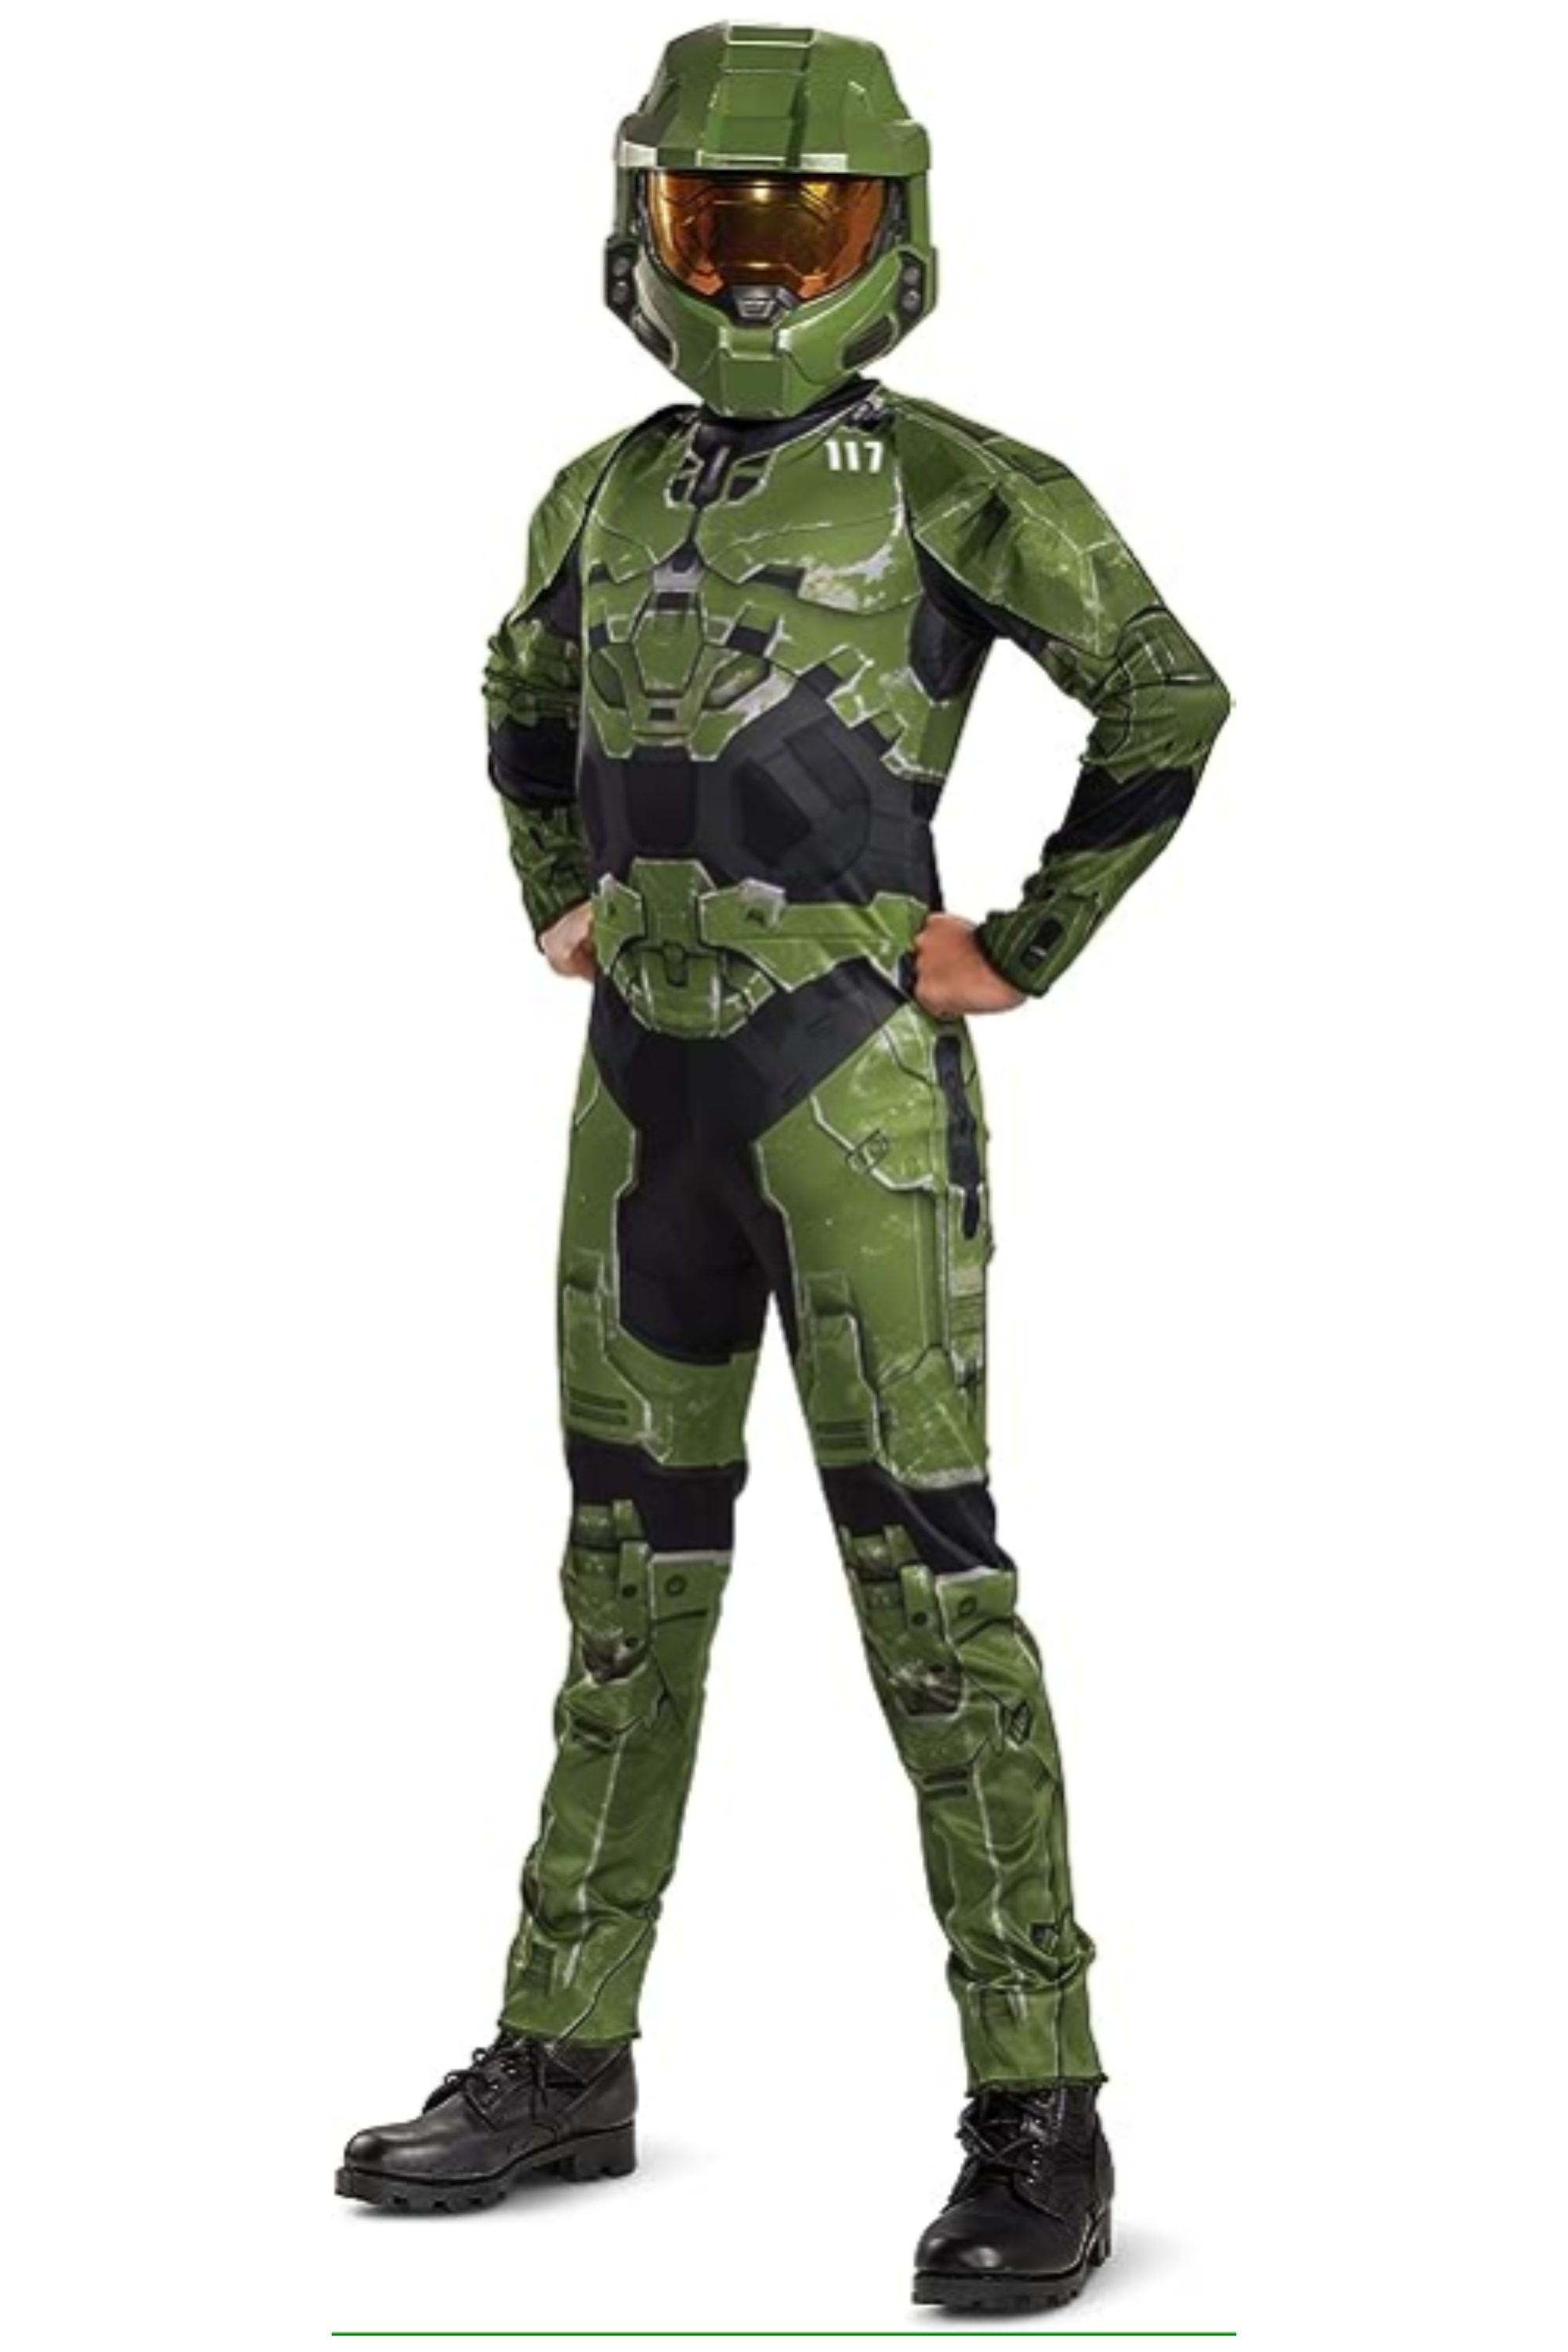 kid wearing a master chief costume